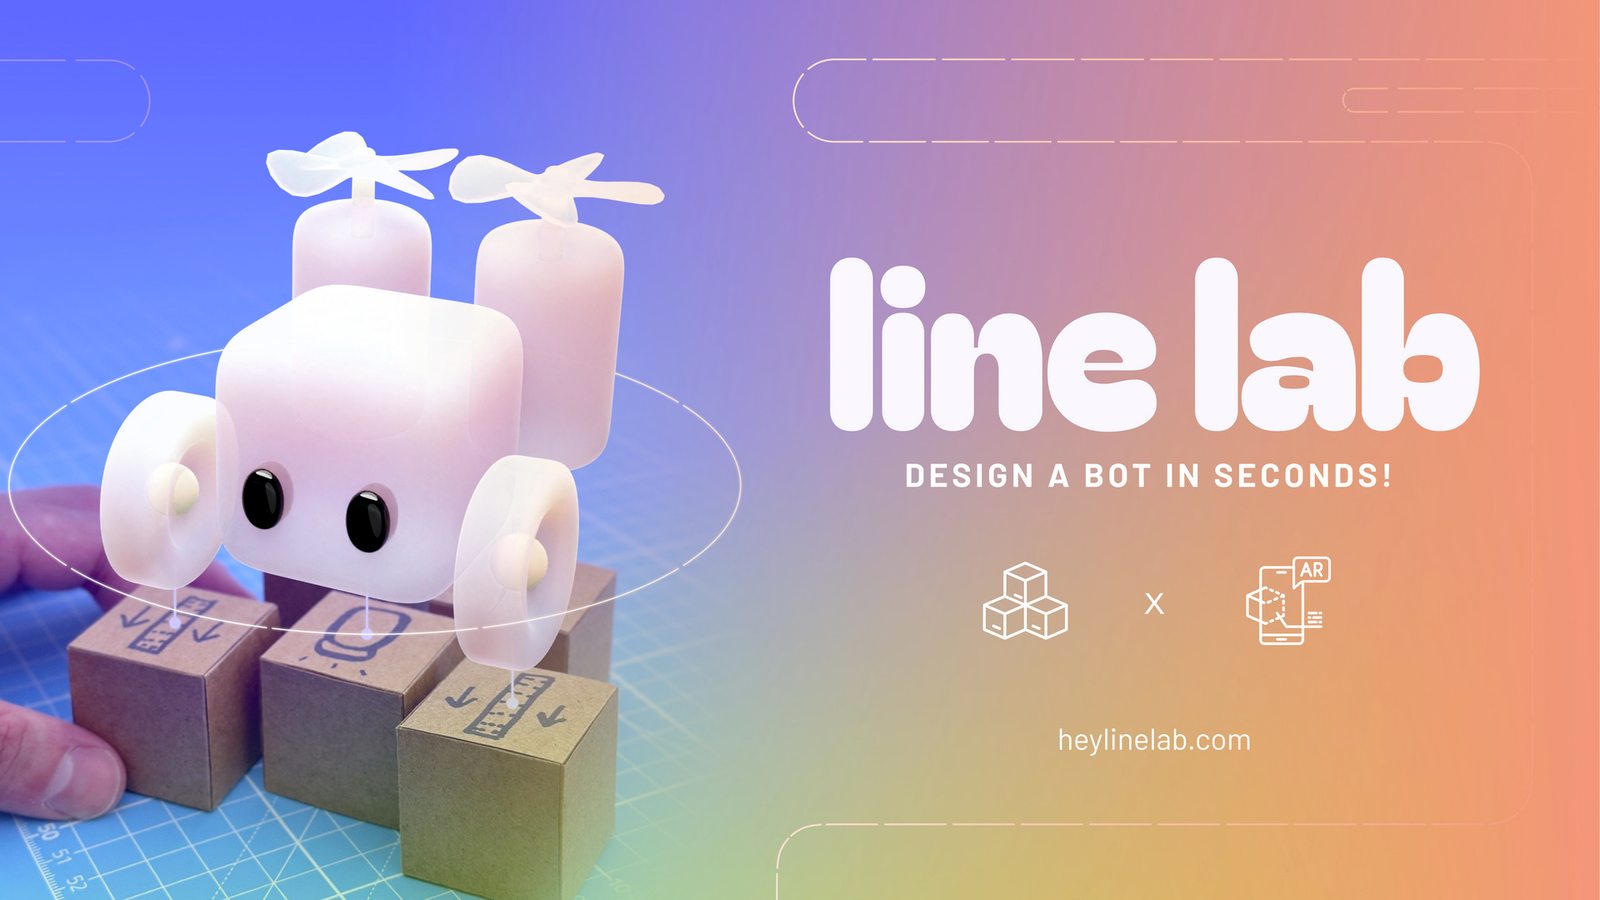 An augmented reality robot on top of paper cardboard cubes, next to the words "Line Lab"